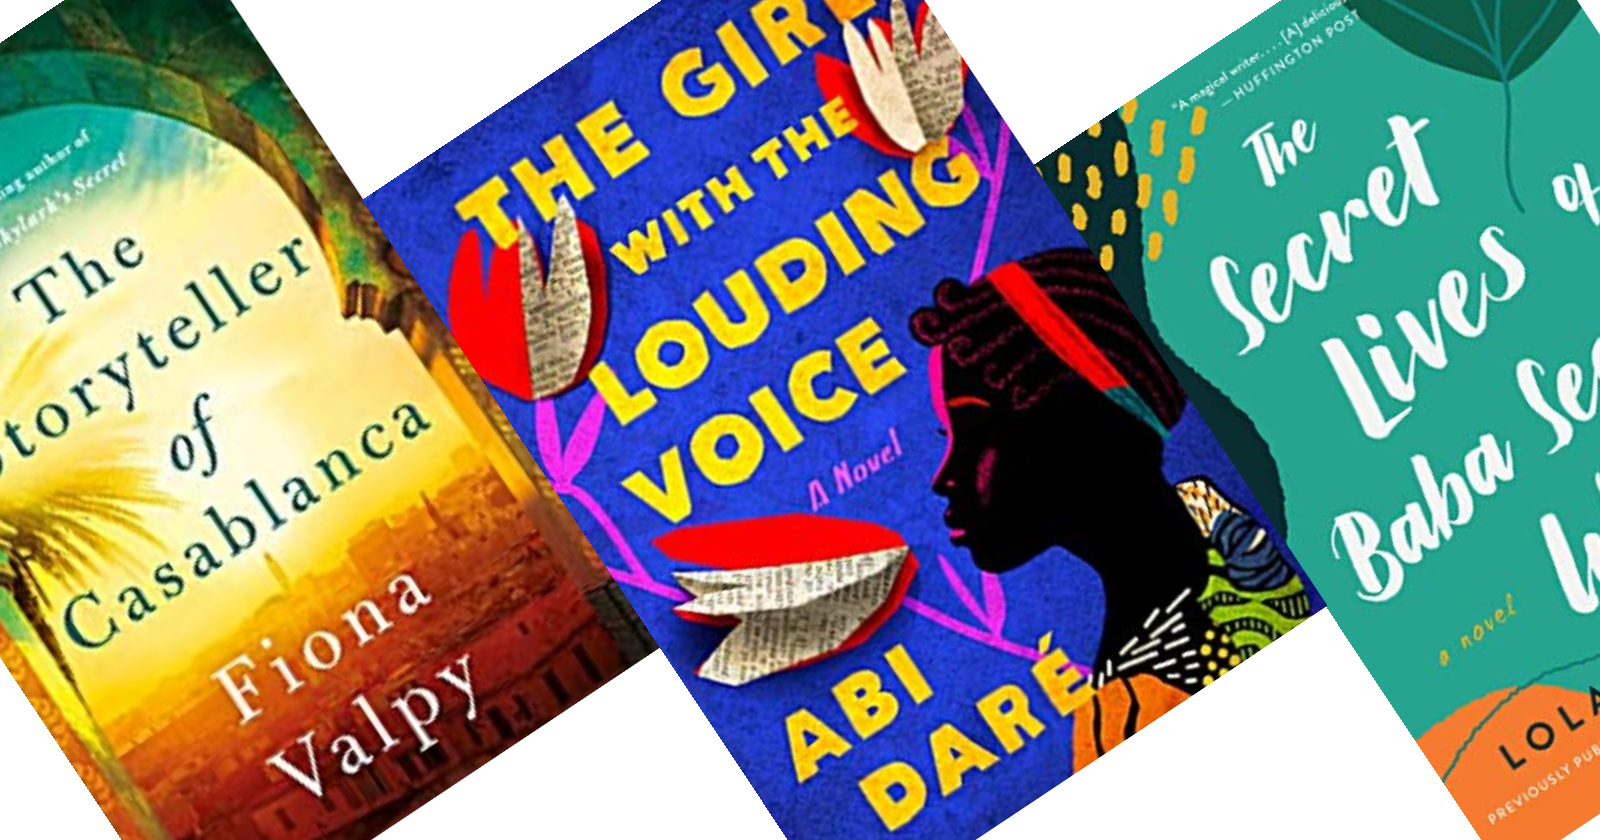 3 tilted book covers with The Girl with Louding Voice in the center